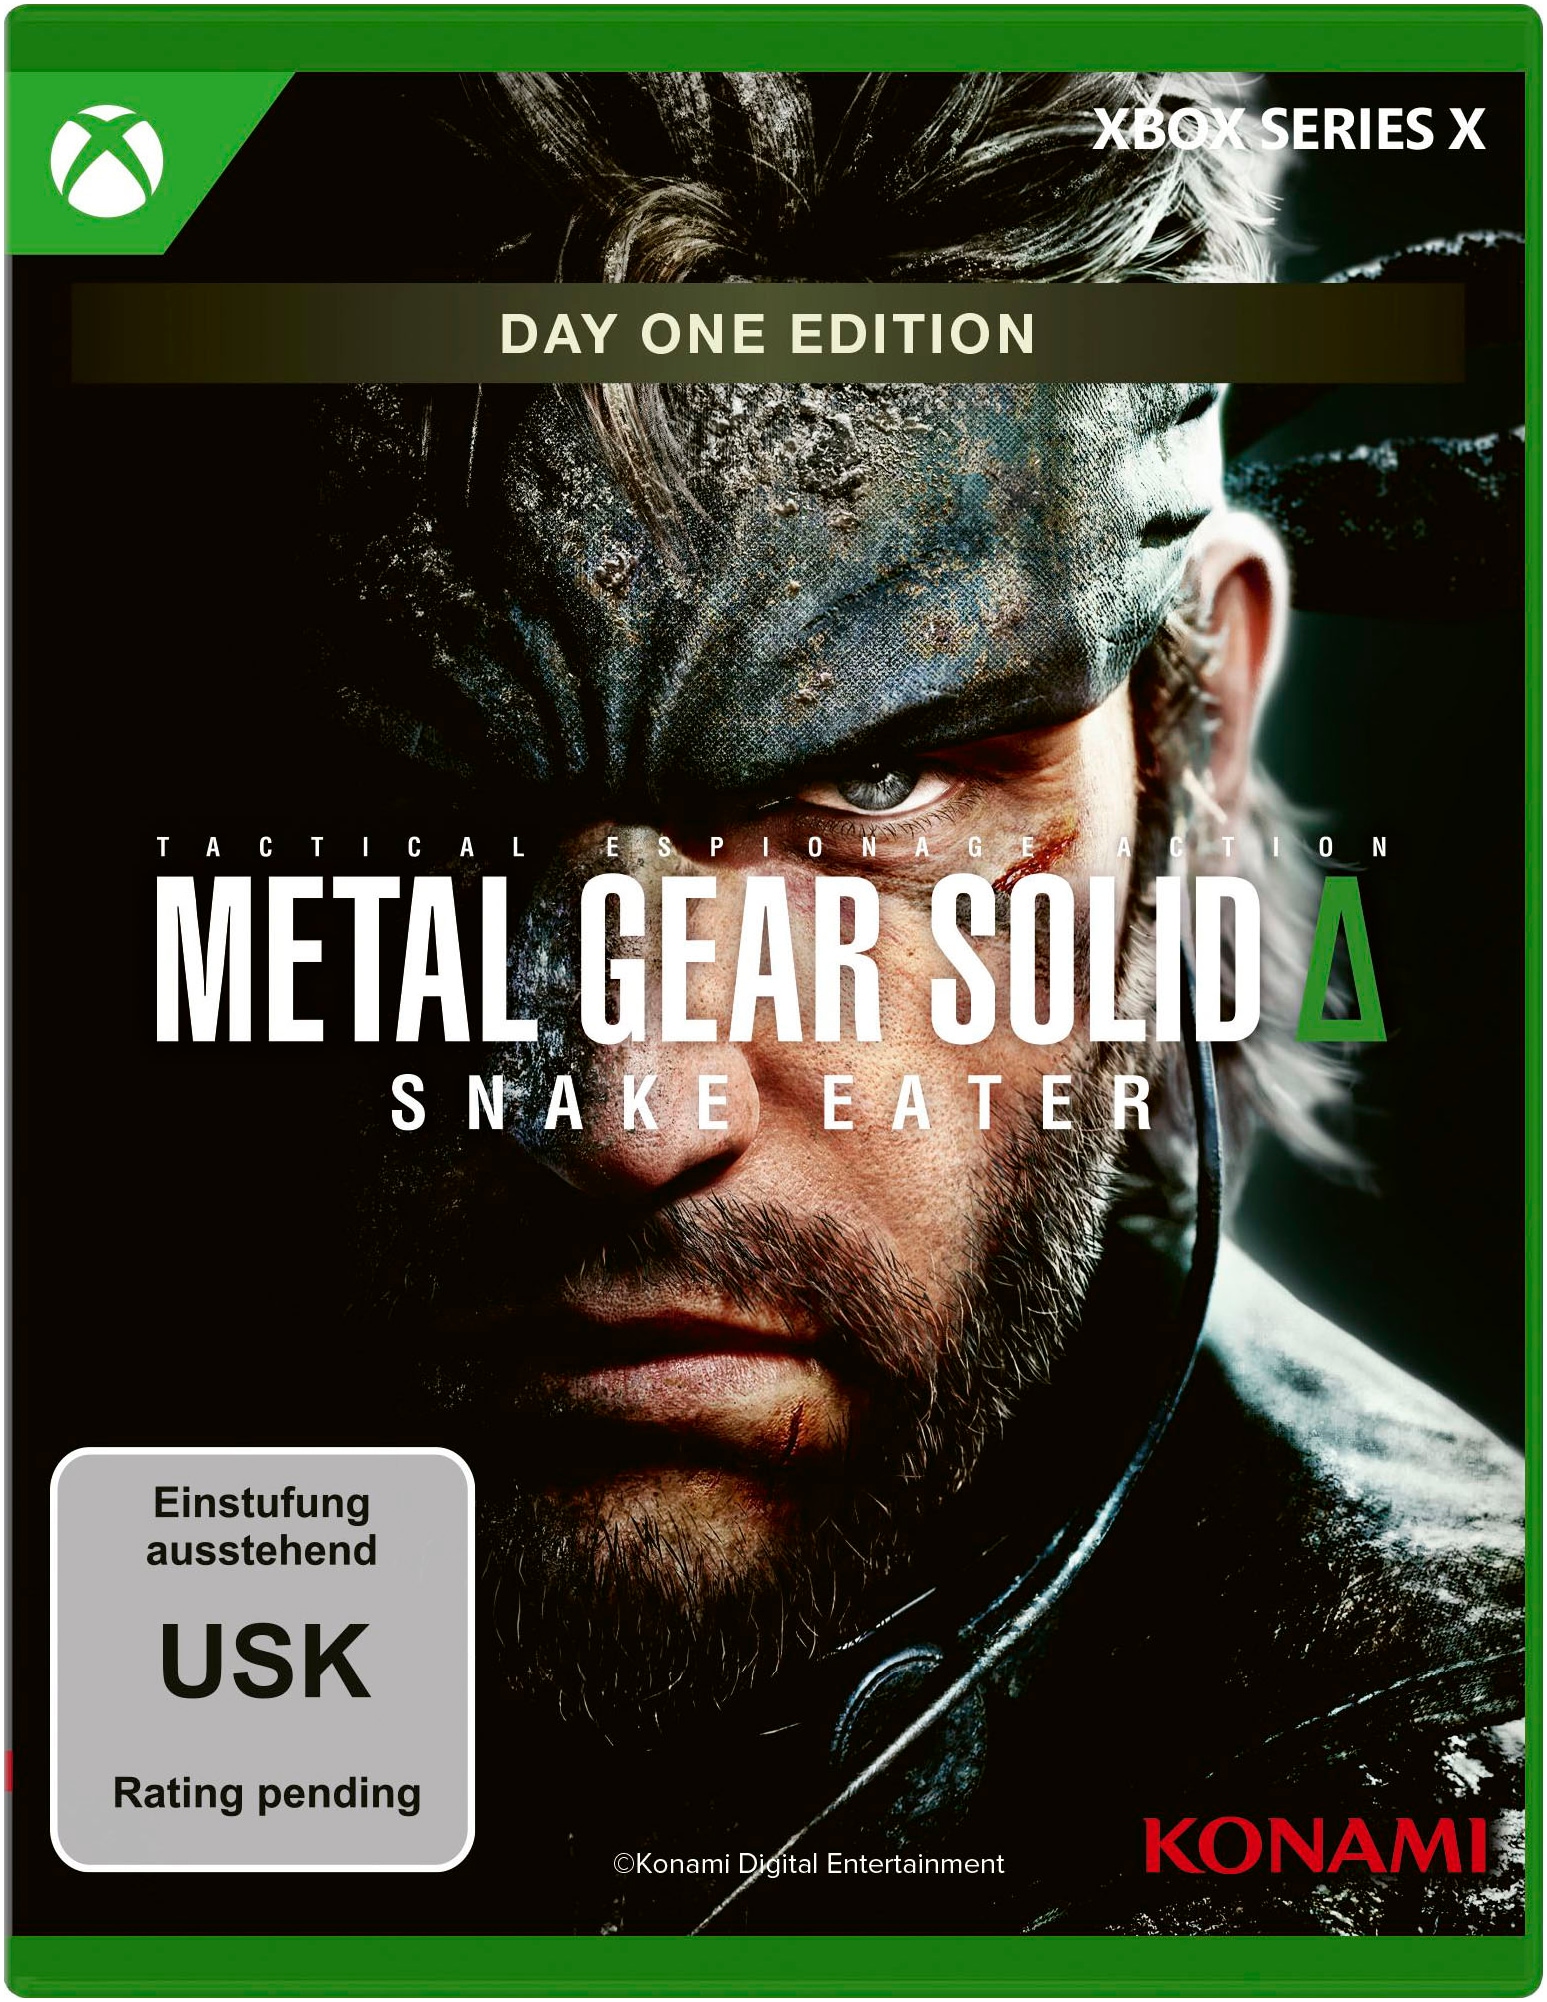 Spielesoftware »Metal Gear Solid Delta - Snake Eater (Day 1 Edition)«, Xbox Series X